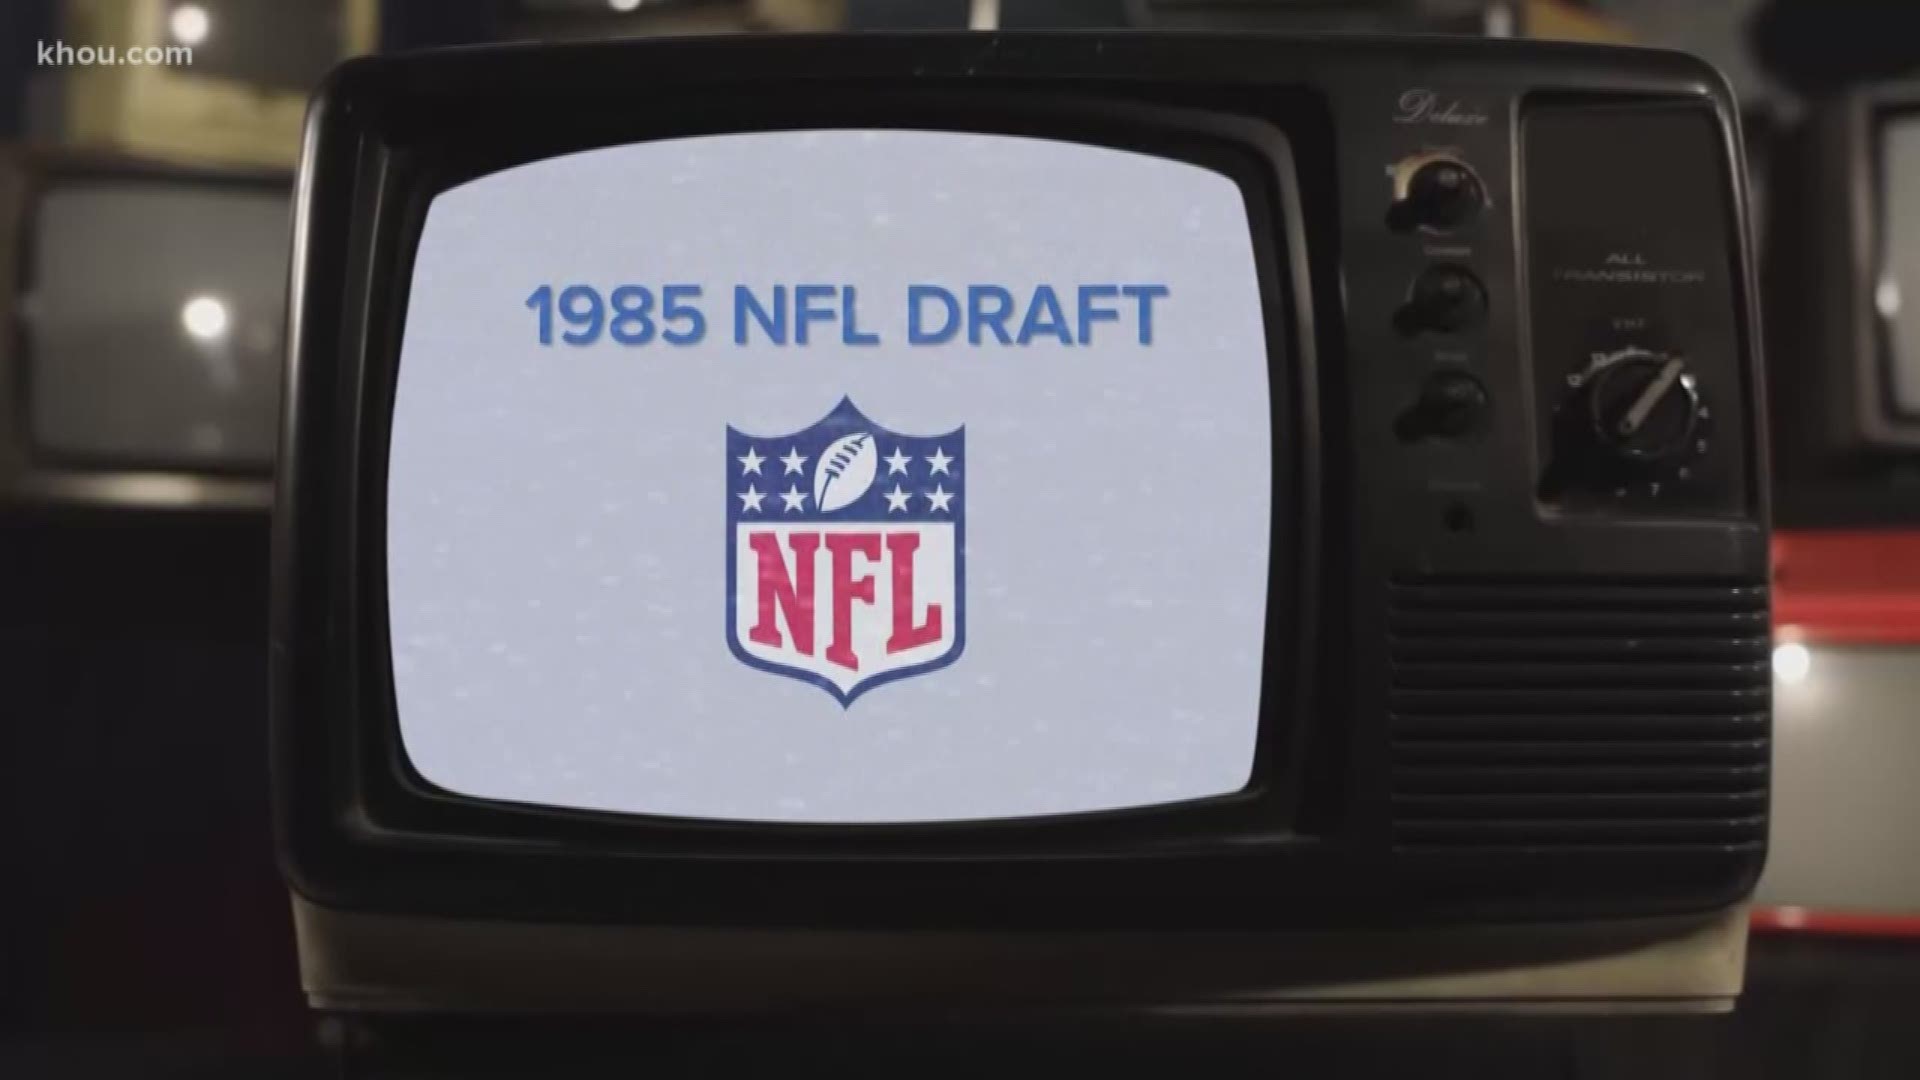 Did you know the Houston Oilers threatened to shut down the NFL Draft in 1985?